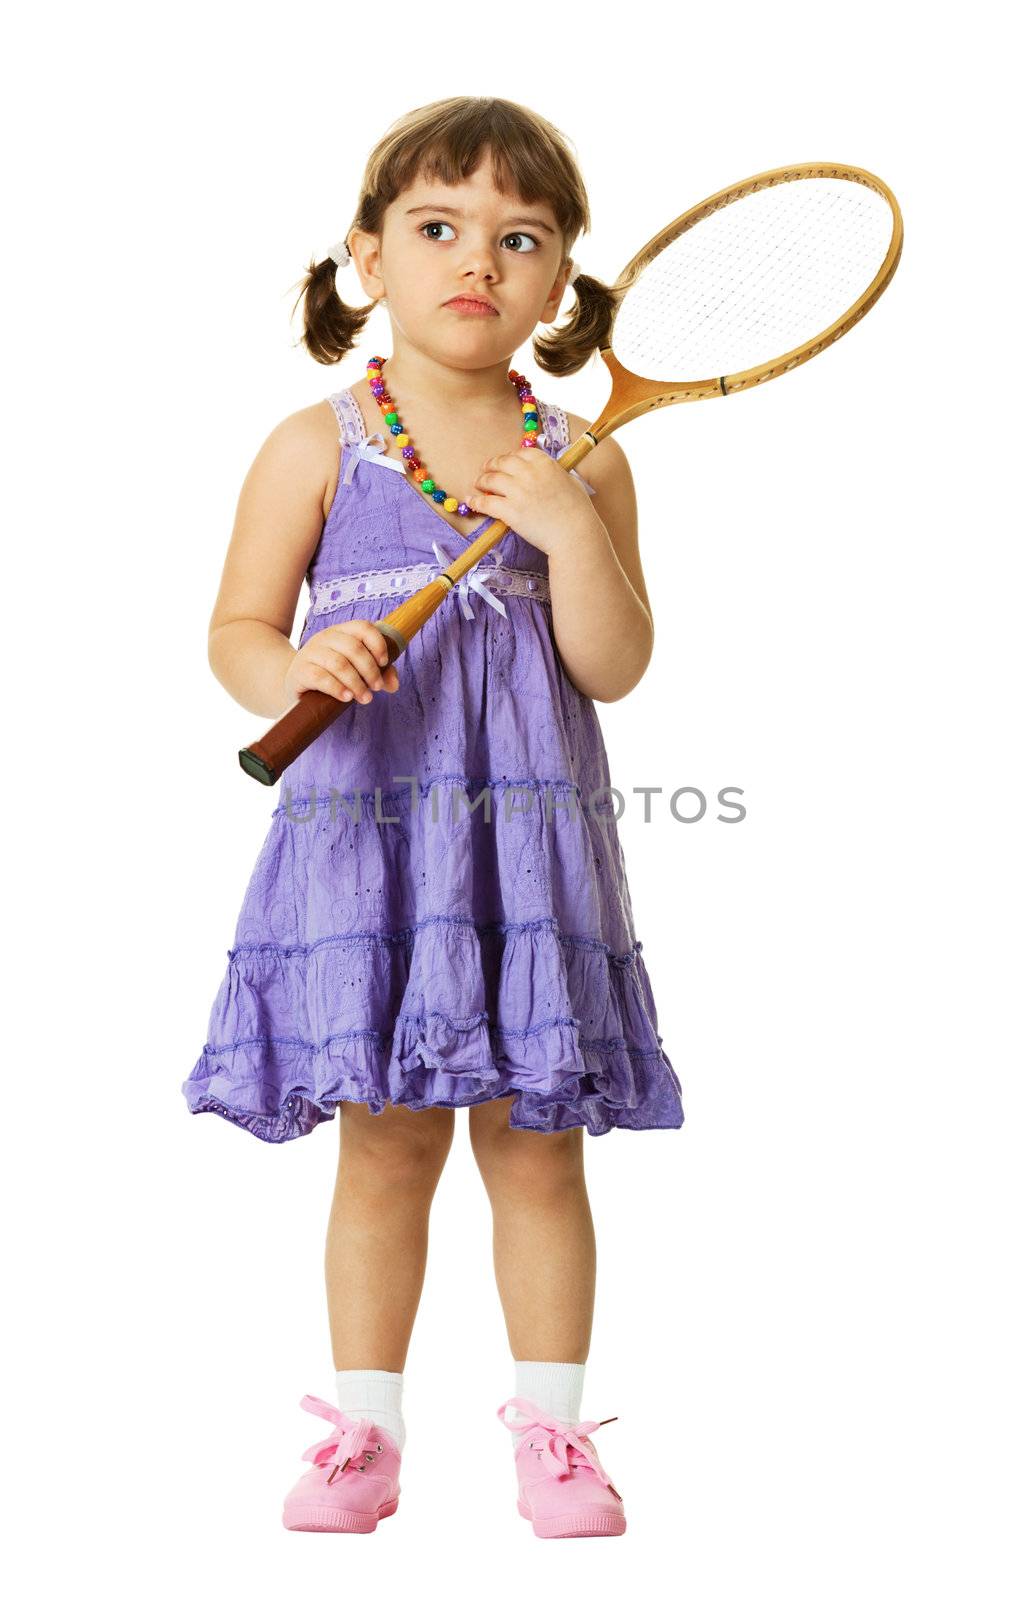 Little girl with a badminton racket by pzaxe